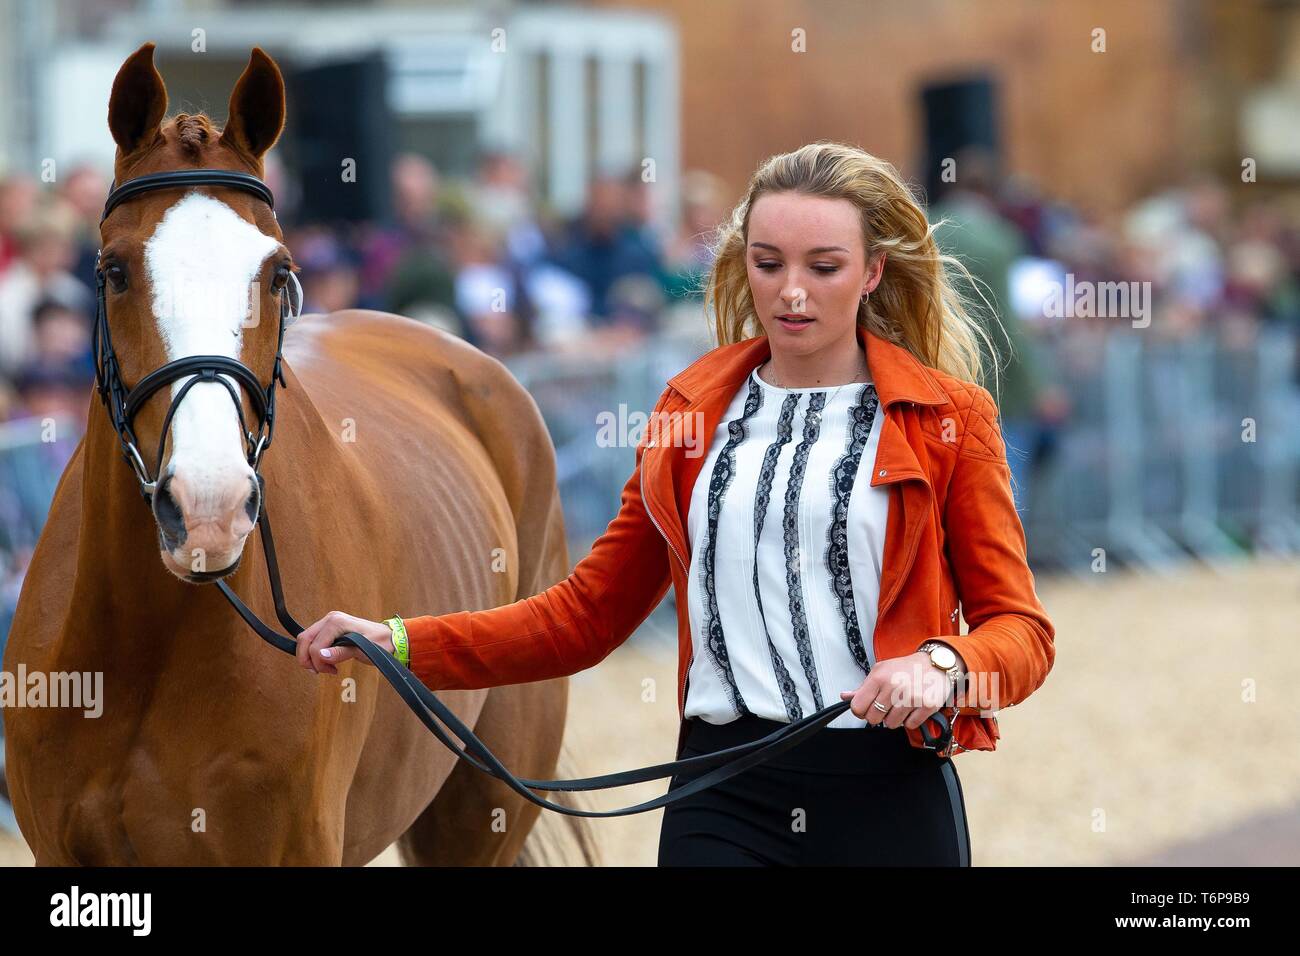 Badminton, Gloucestershire, UK. 02nd May, 2019. Emily King. GBR. Dargun. Trot Up. Mitsubishi Motors Badminton Horse Trials. Rolex Grand Slam Event. Horse Trials. Eventing. Badminton. Gloucestershire. United Kingdom. GBR. {01}/{05}/{2019}. Credit: Sport In Pictures/Alamy Live News Stock Photo